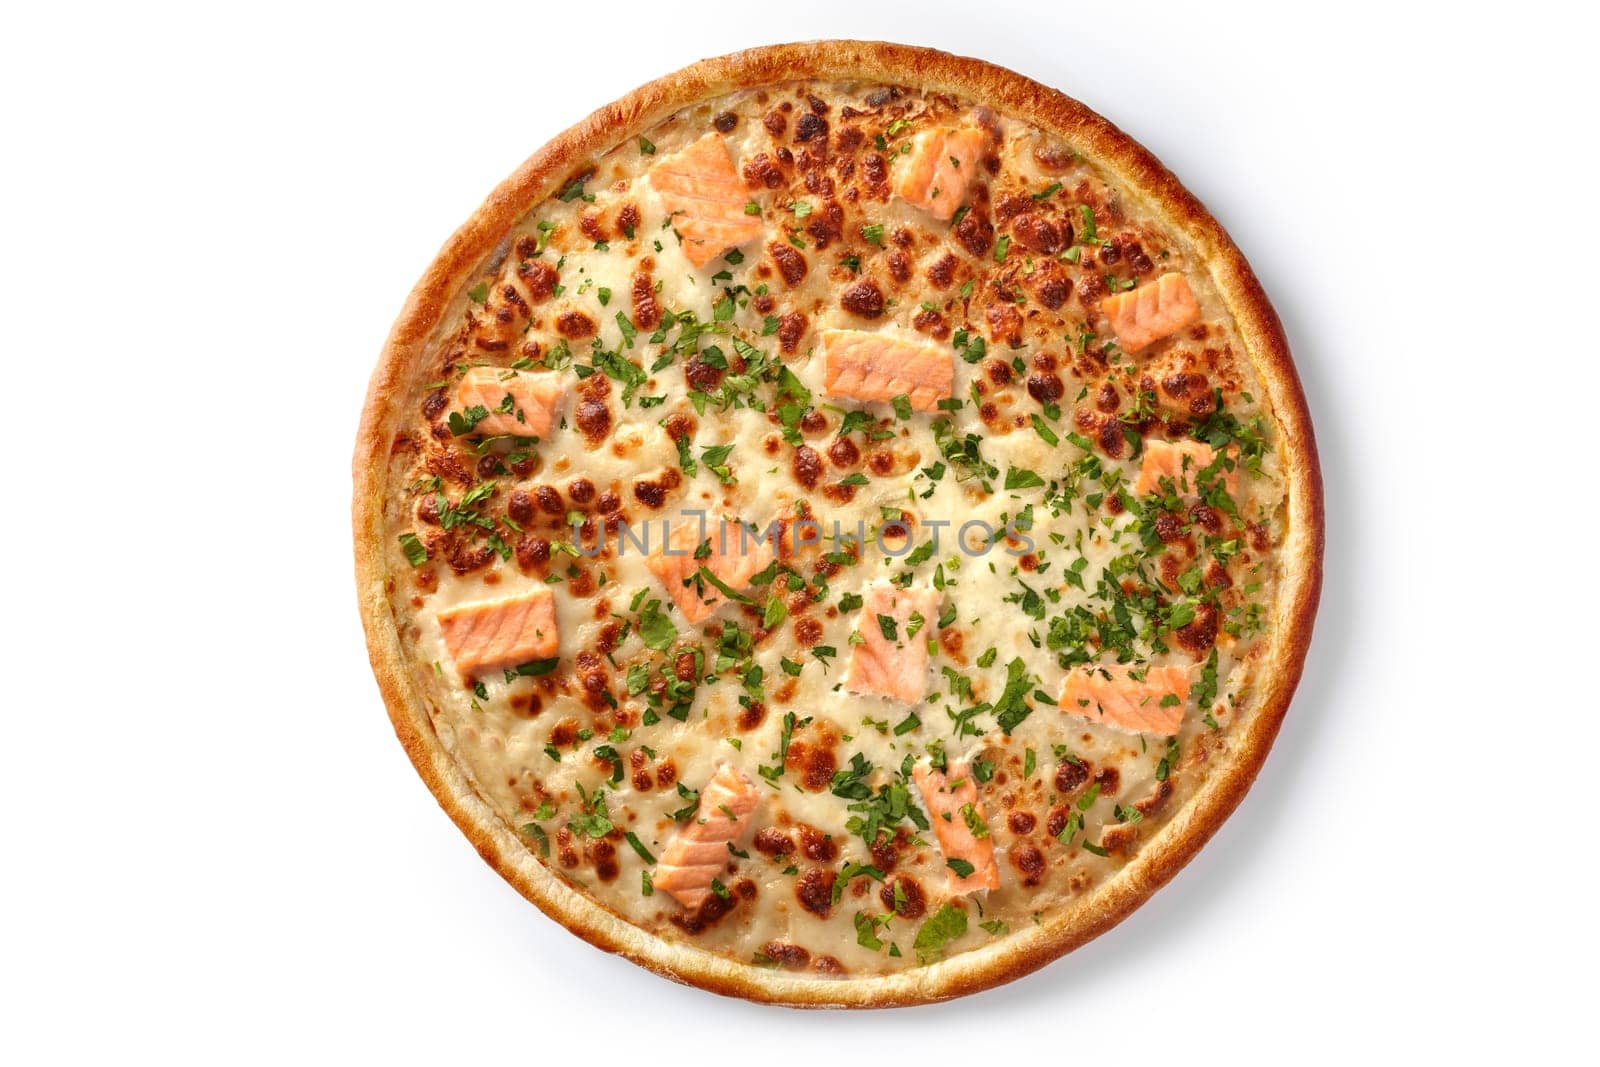 Italian browned seafood pizza with salmon, cheese and herbs by nazarovsergey